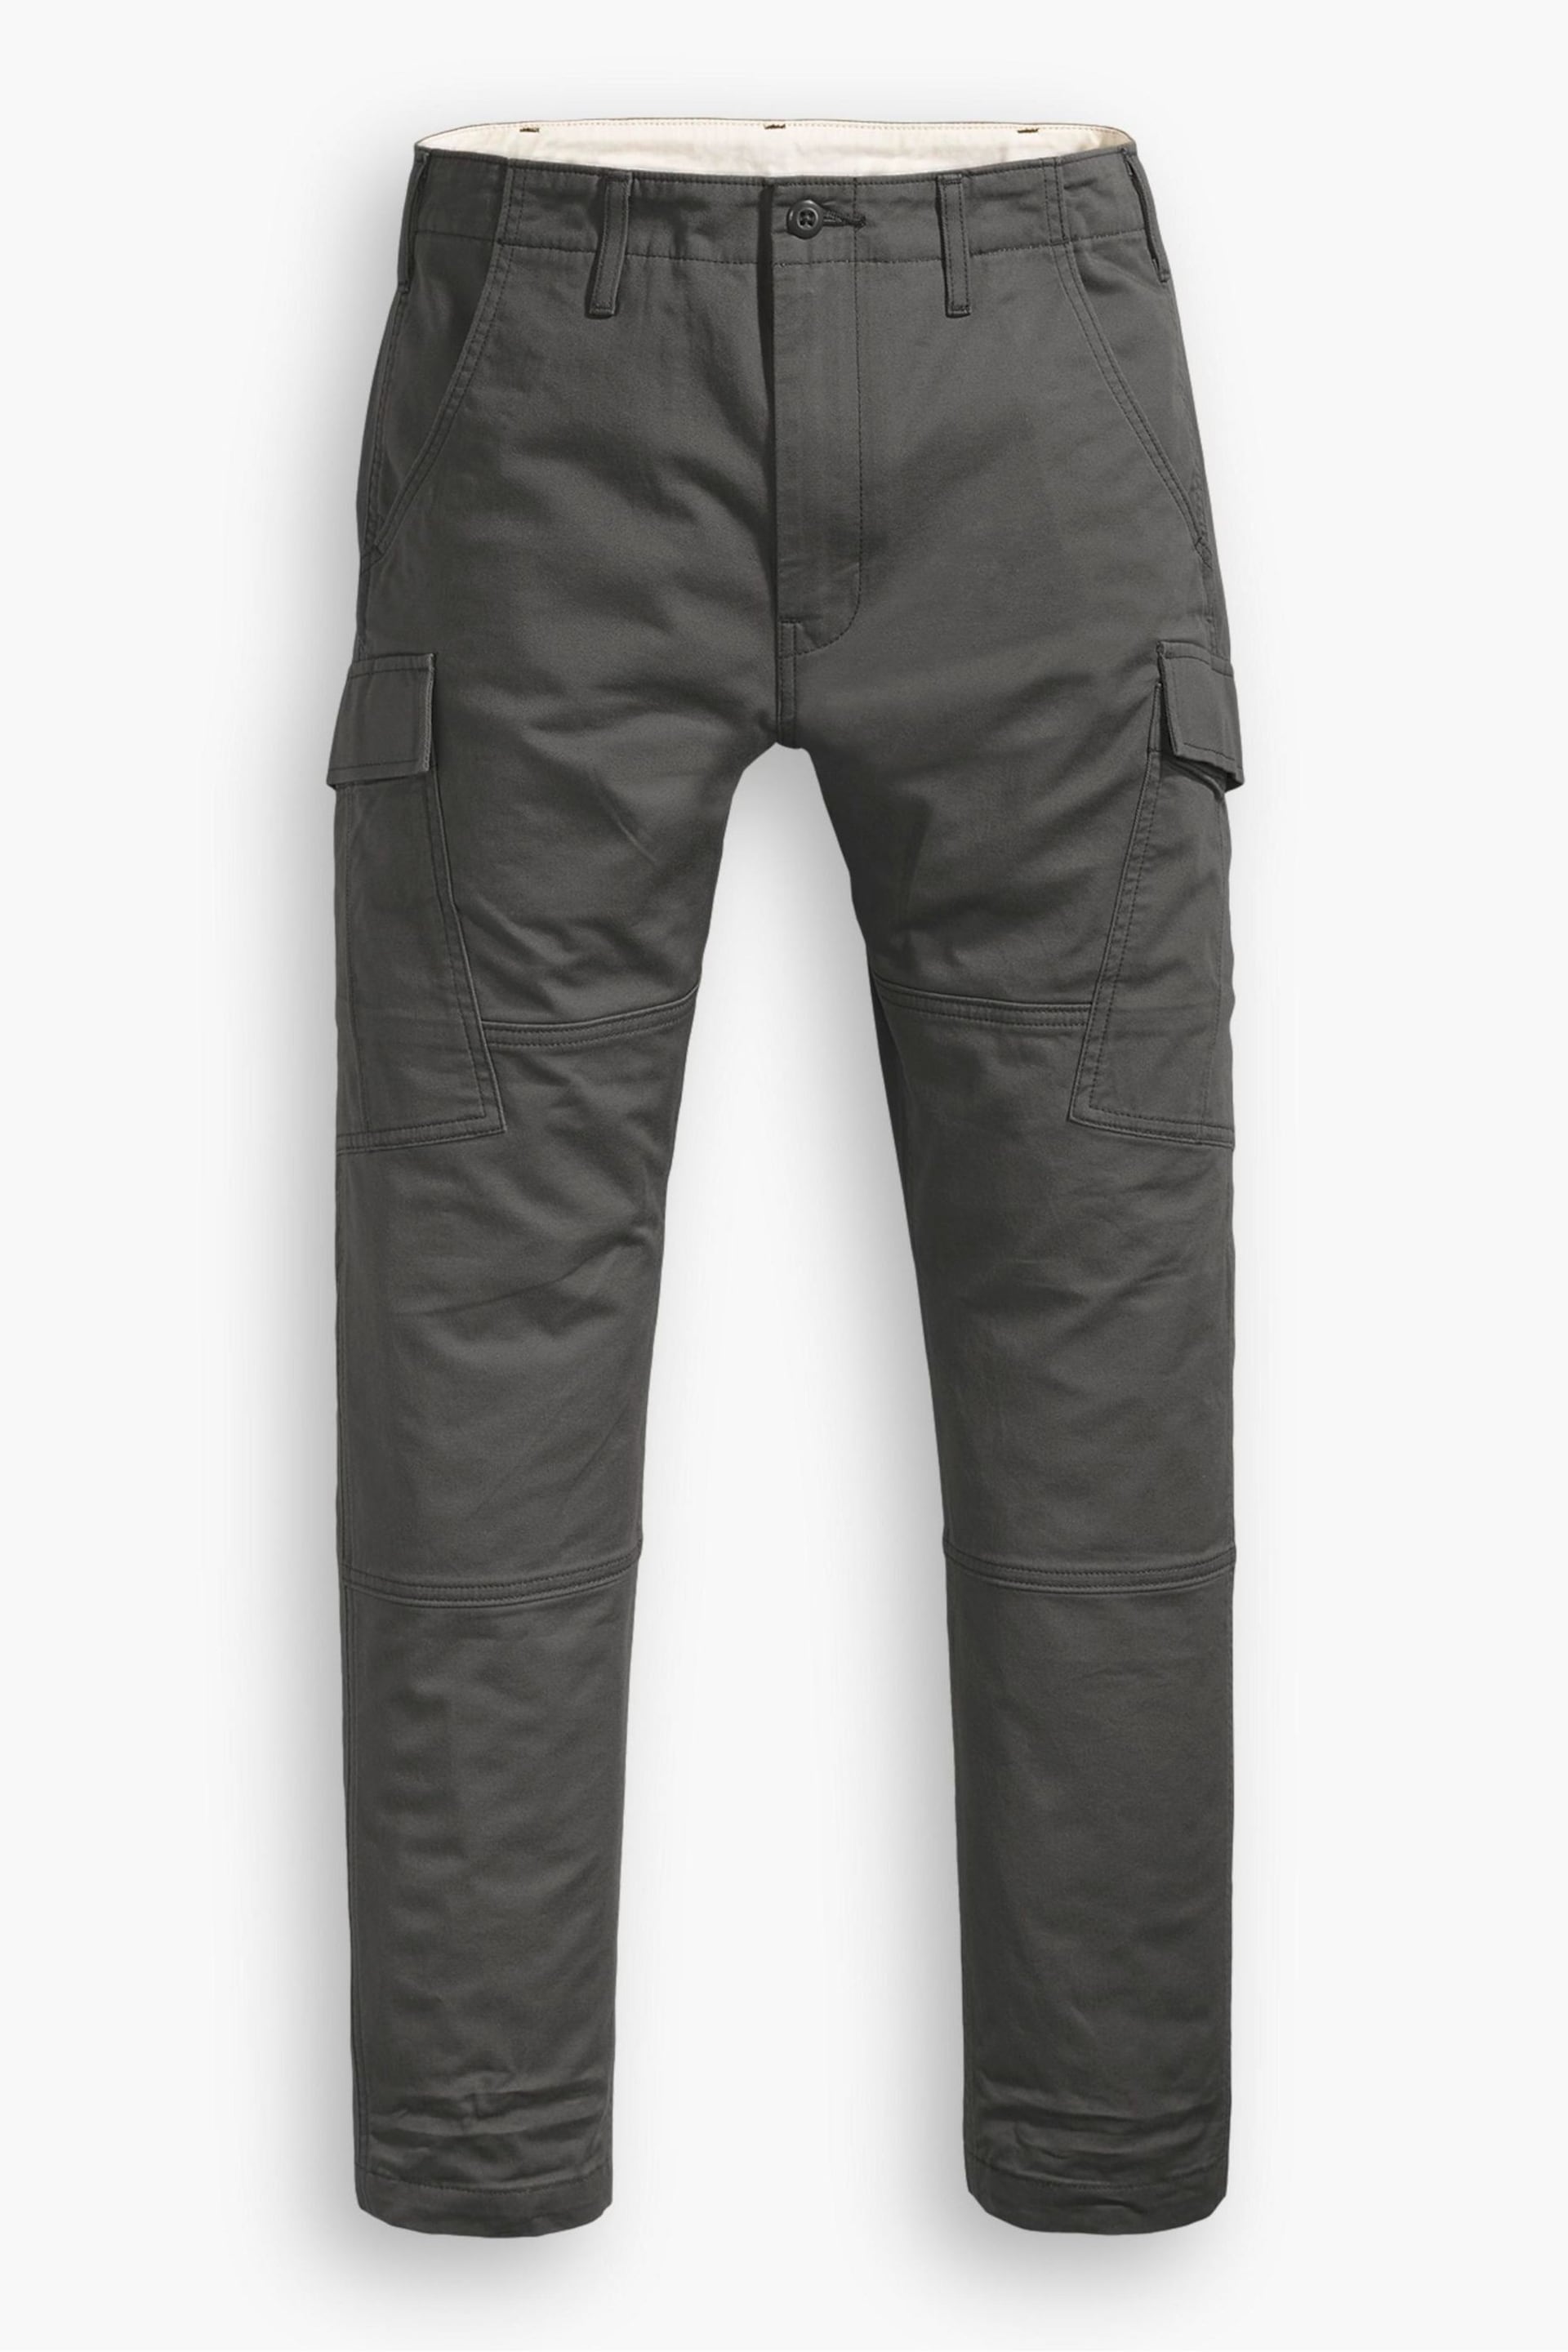 Levi's® Grey Lo Ball Cargo Trousers - Image 6 of 6